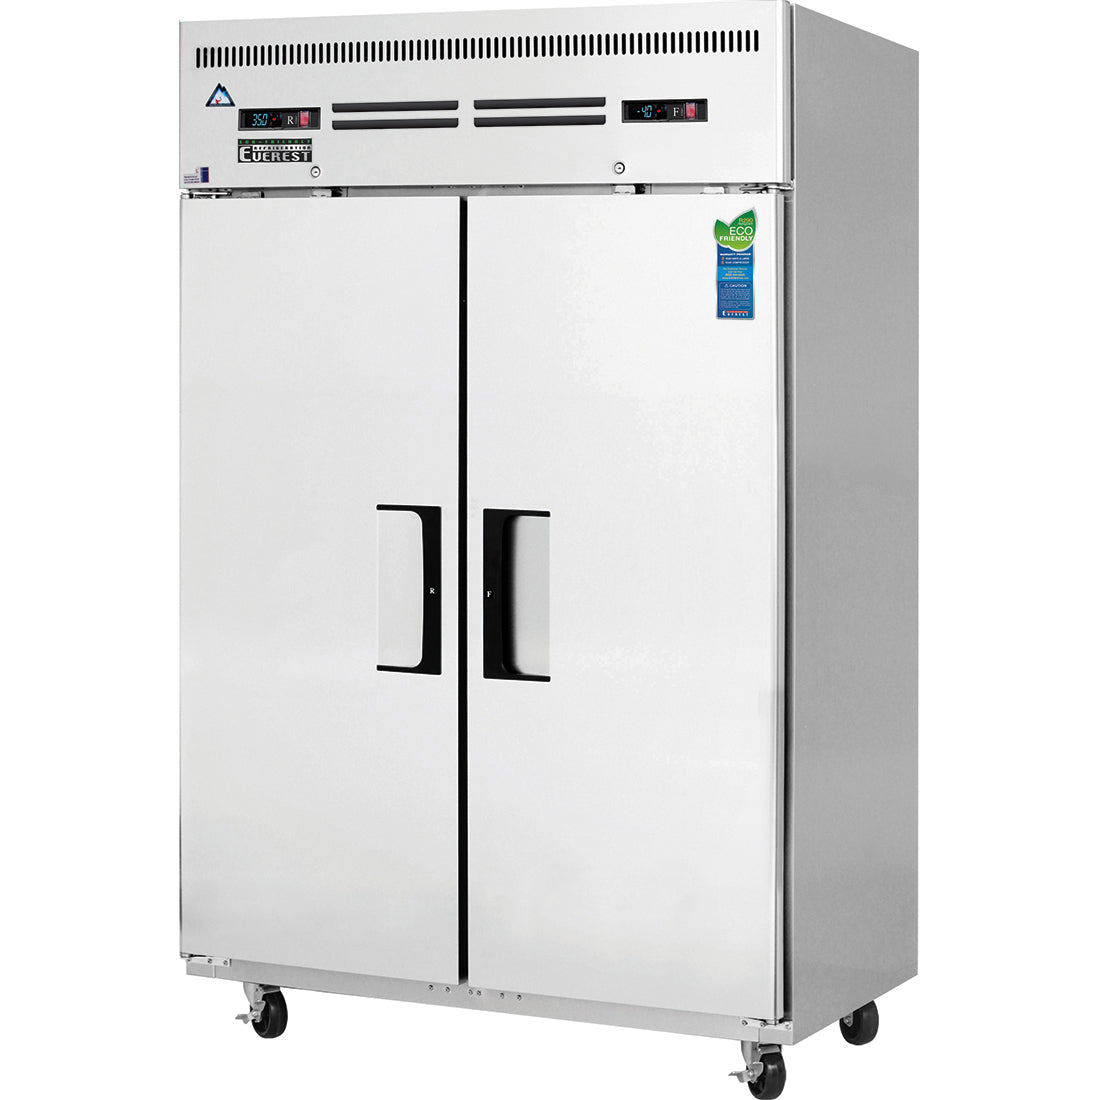 Everest ES Series-ESRF2A Two Section Solid Door Upright Reach-In Dual Temp Refrigerator/Freezer Combo